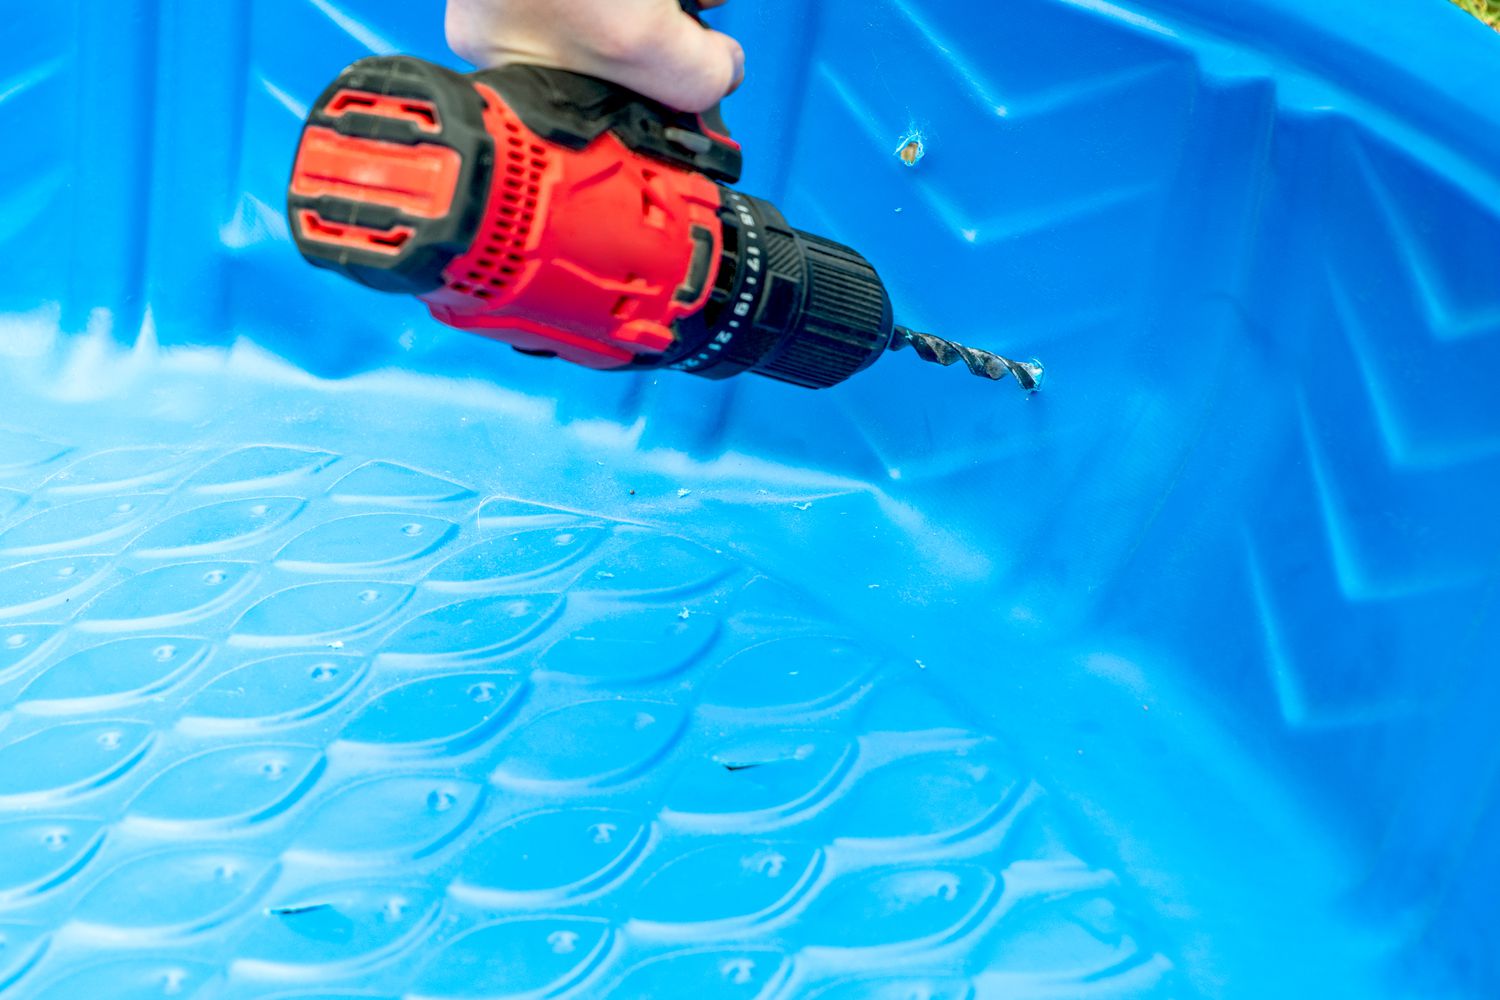 Electric drill poking holes in side of kiddie pool for drainage